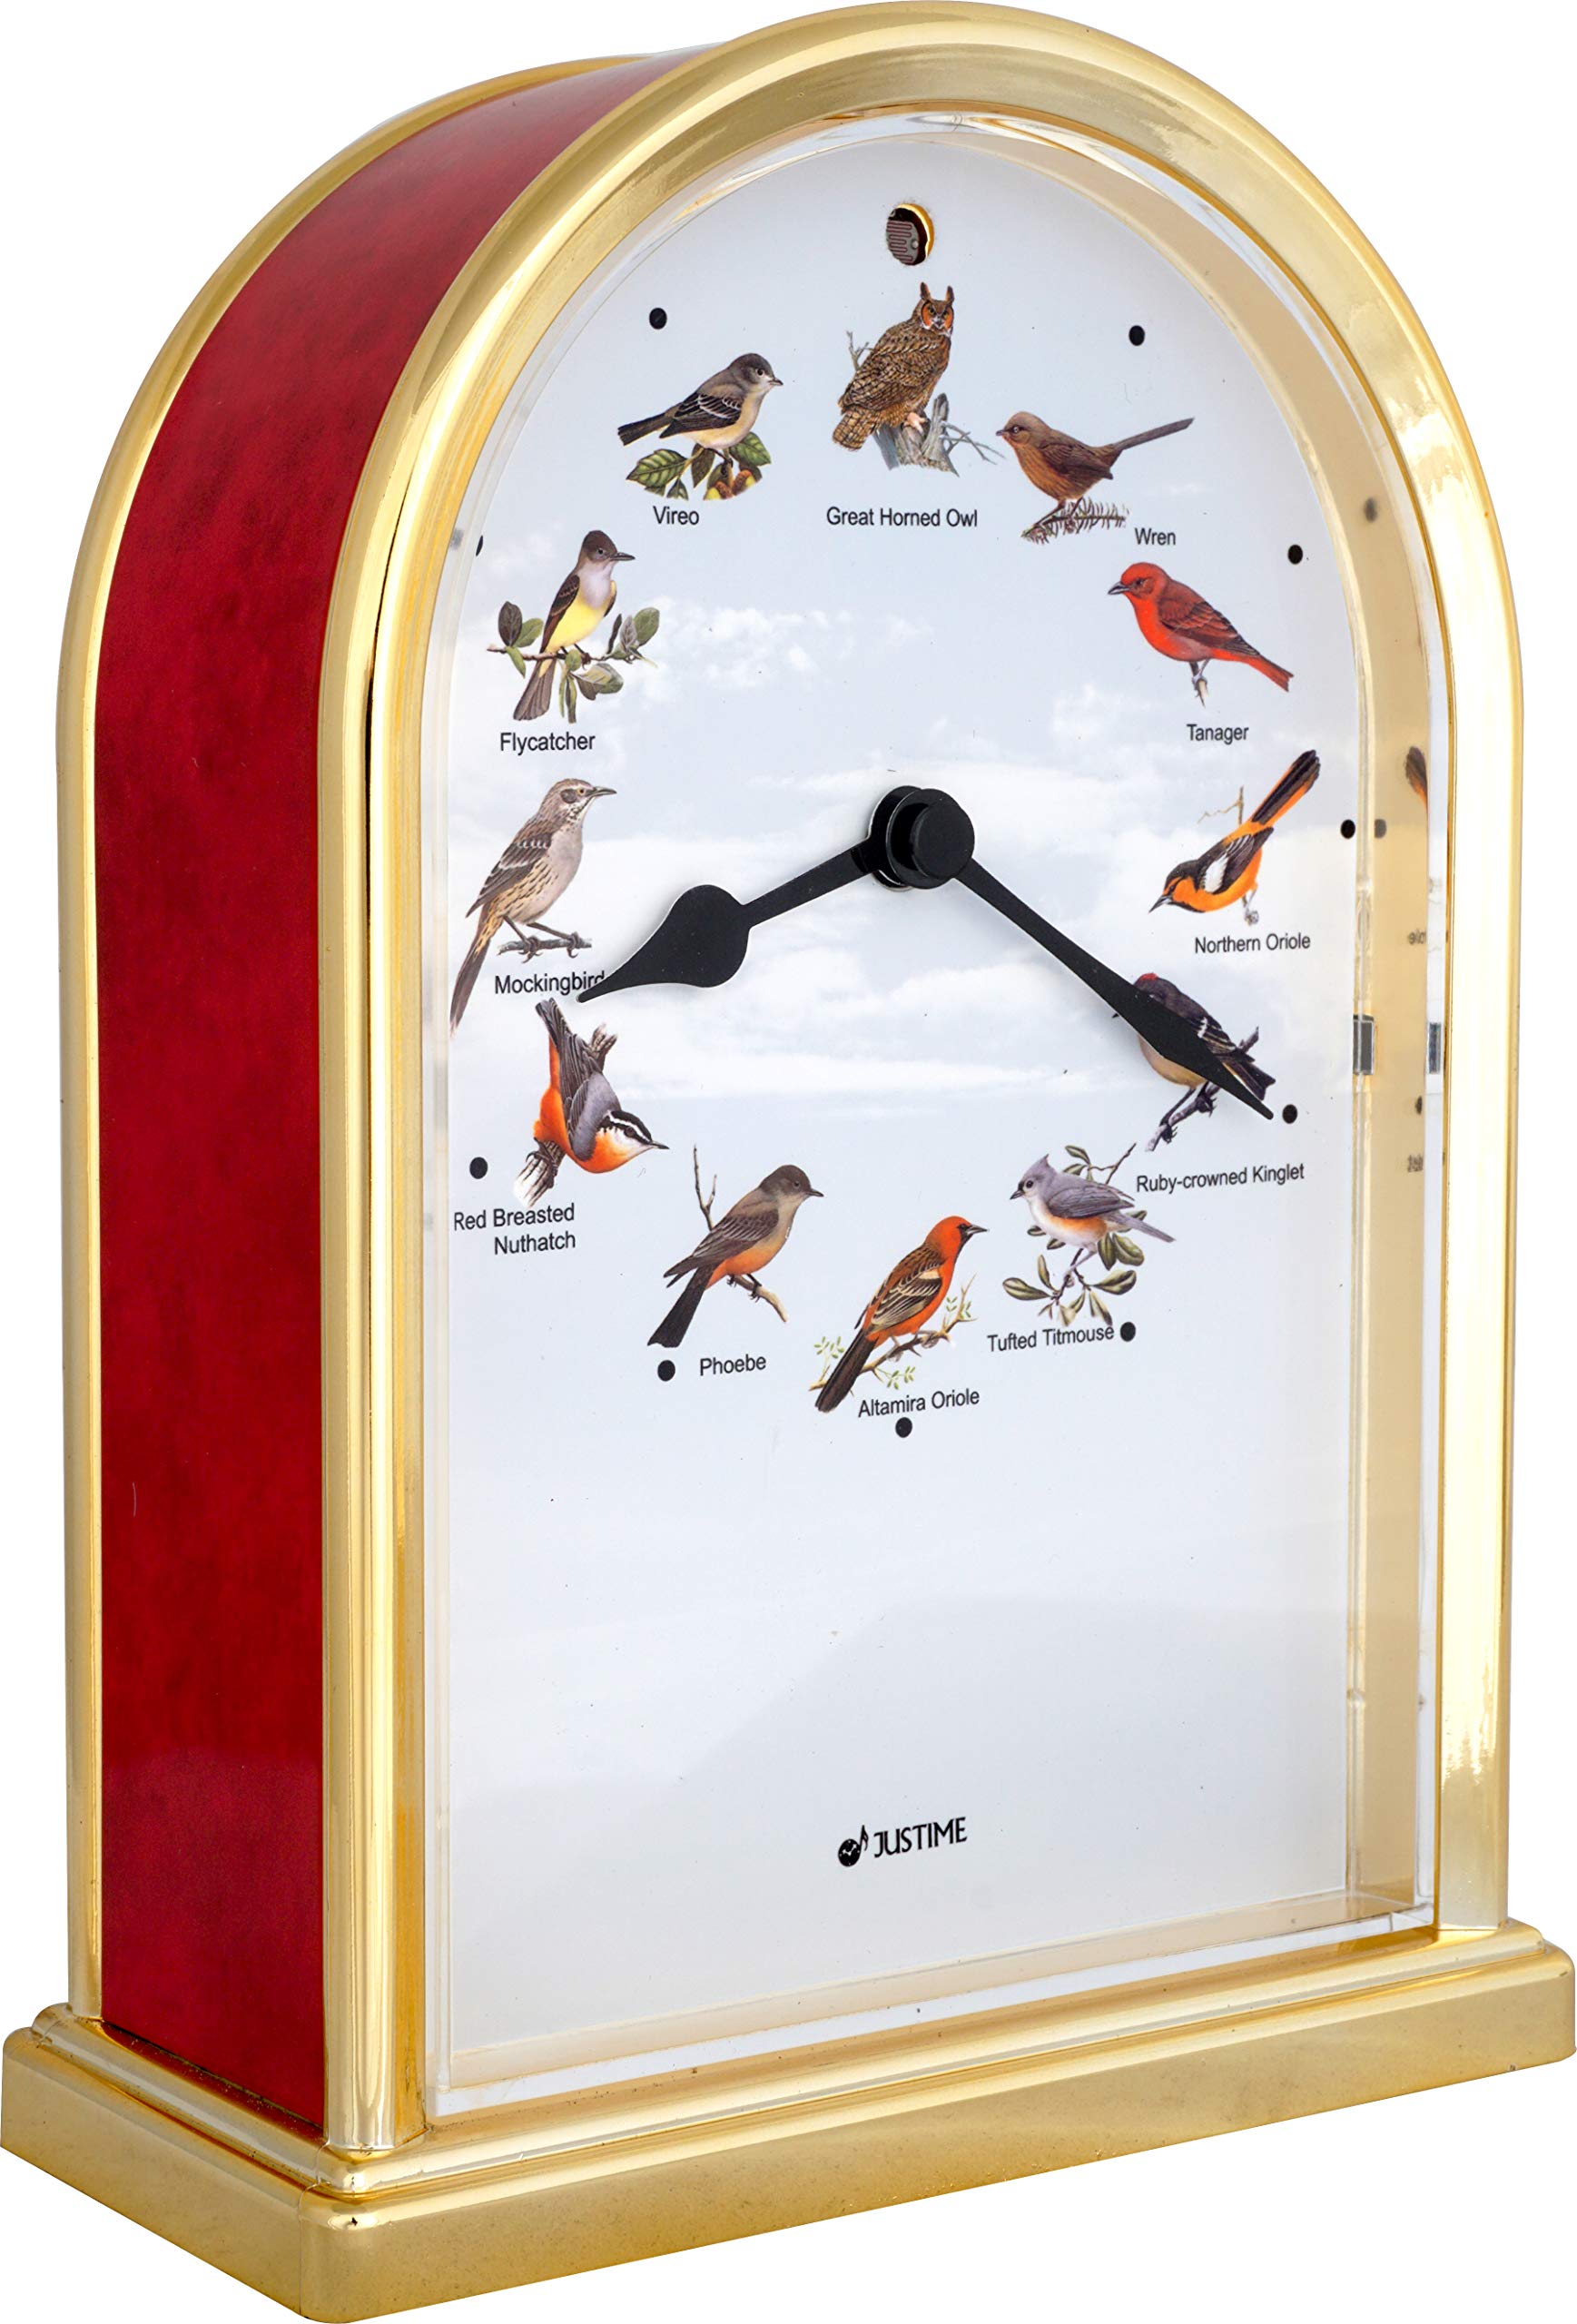 JUSTIME 7.5 inch Tall OWL Lovely Collection Plays 12 Popular Bird's Songs Table Clock Home Deco Multi-Color Unique Gift Selection (TCBD-O-RM-G)